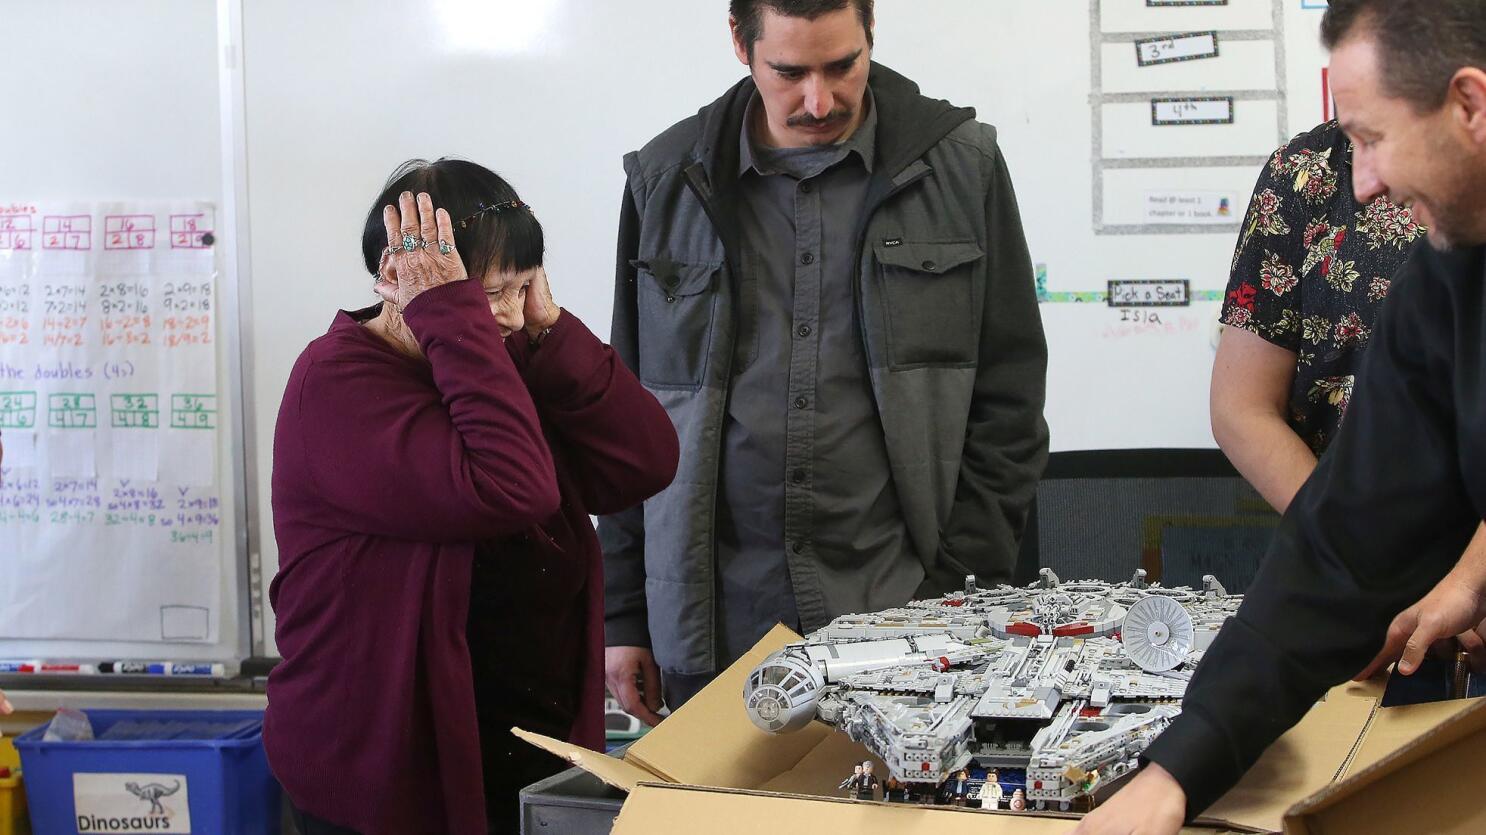 90% of massive Star Wars' Lego collection at Concordia Elementary